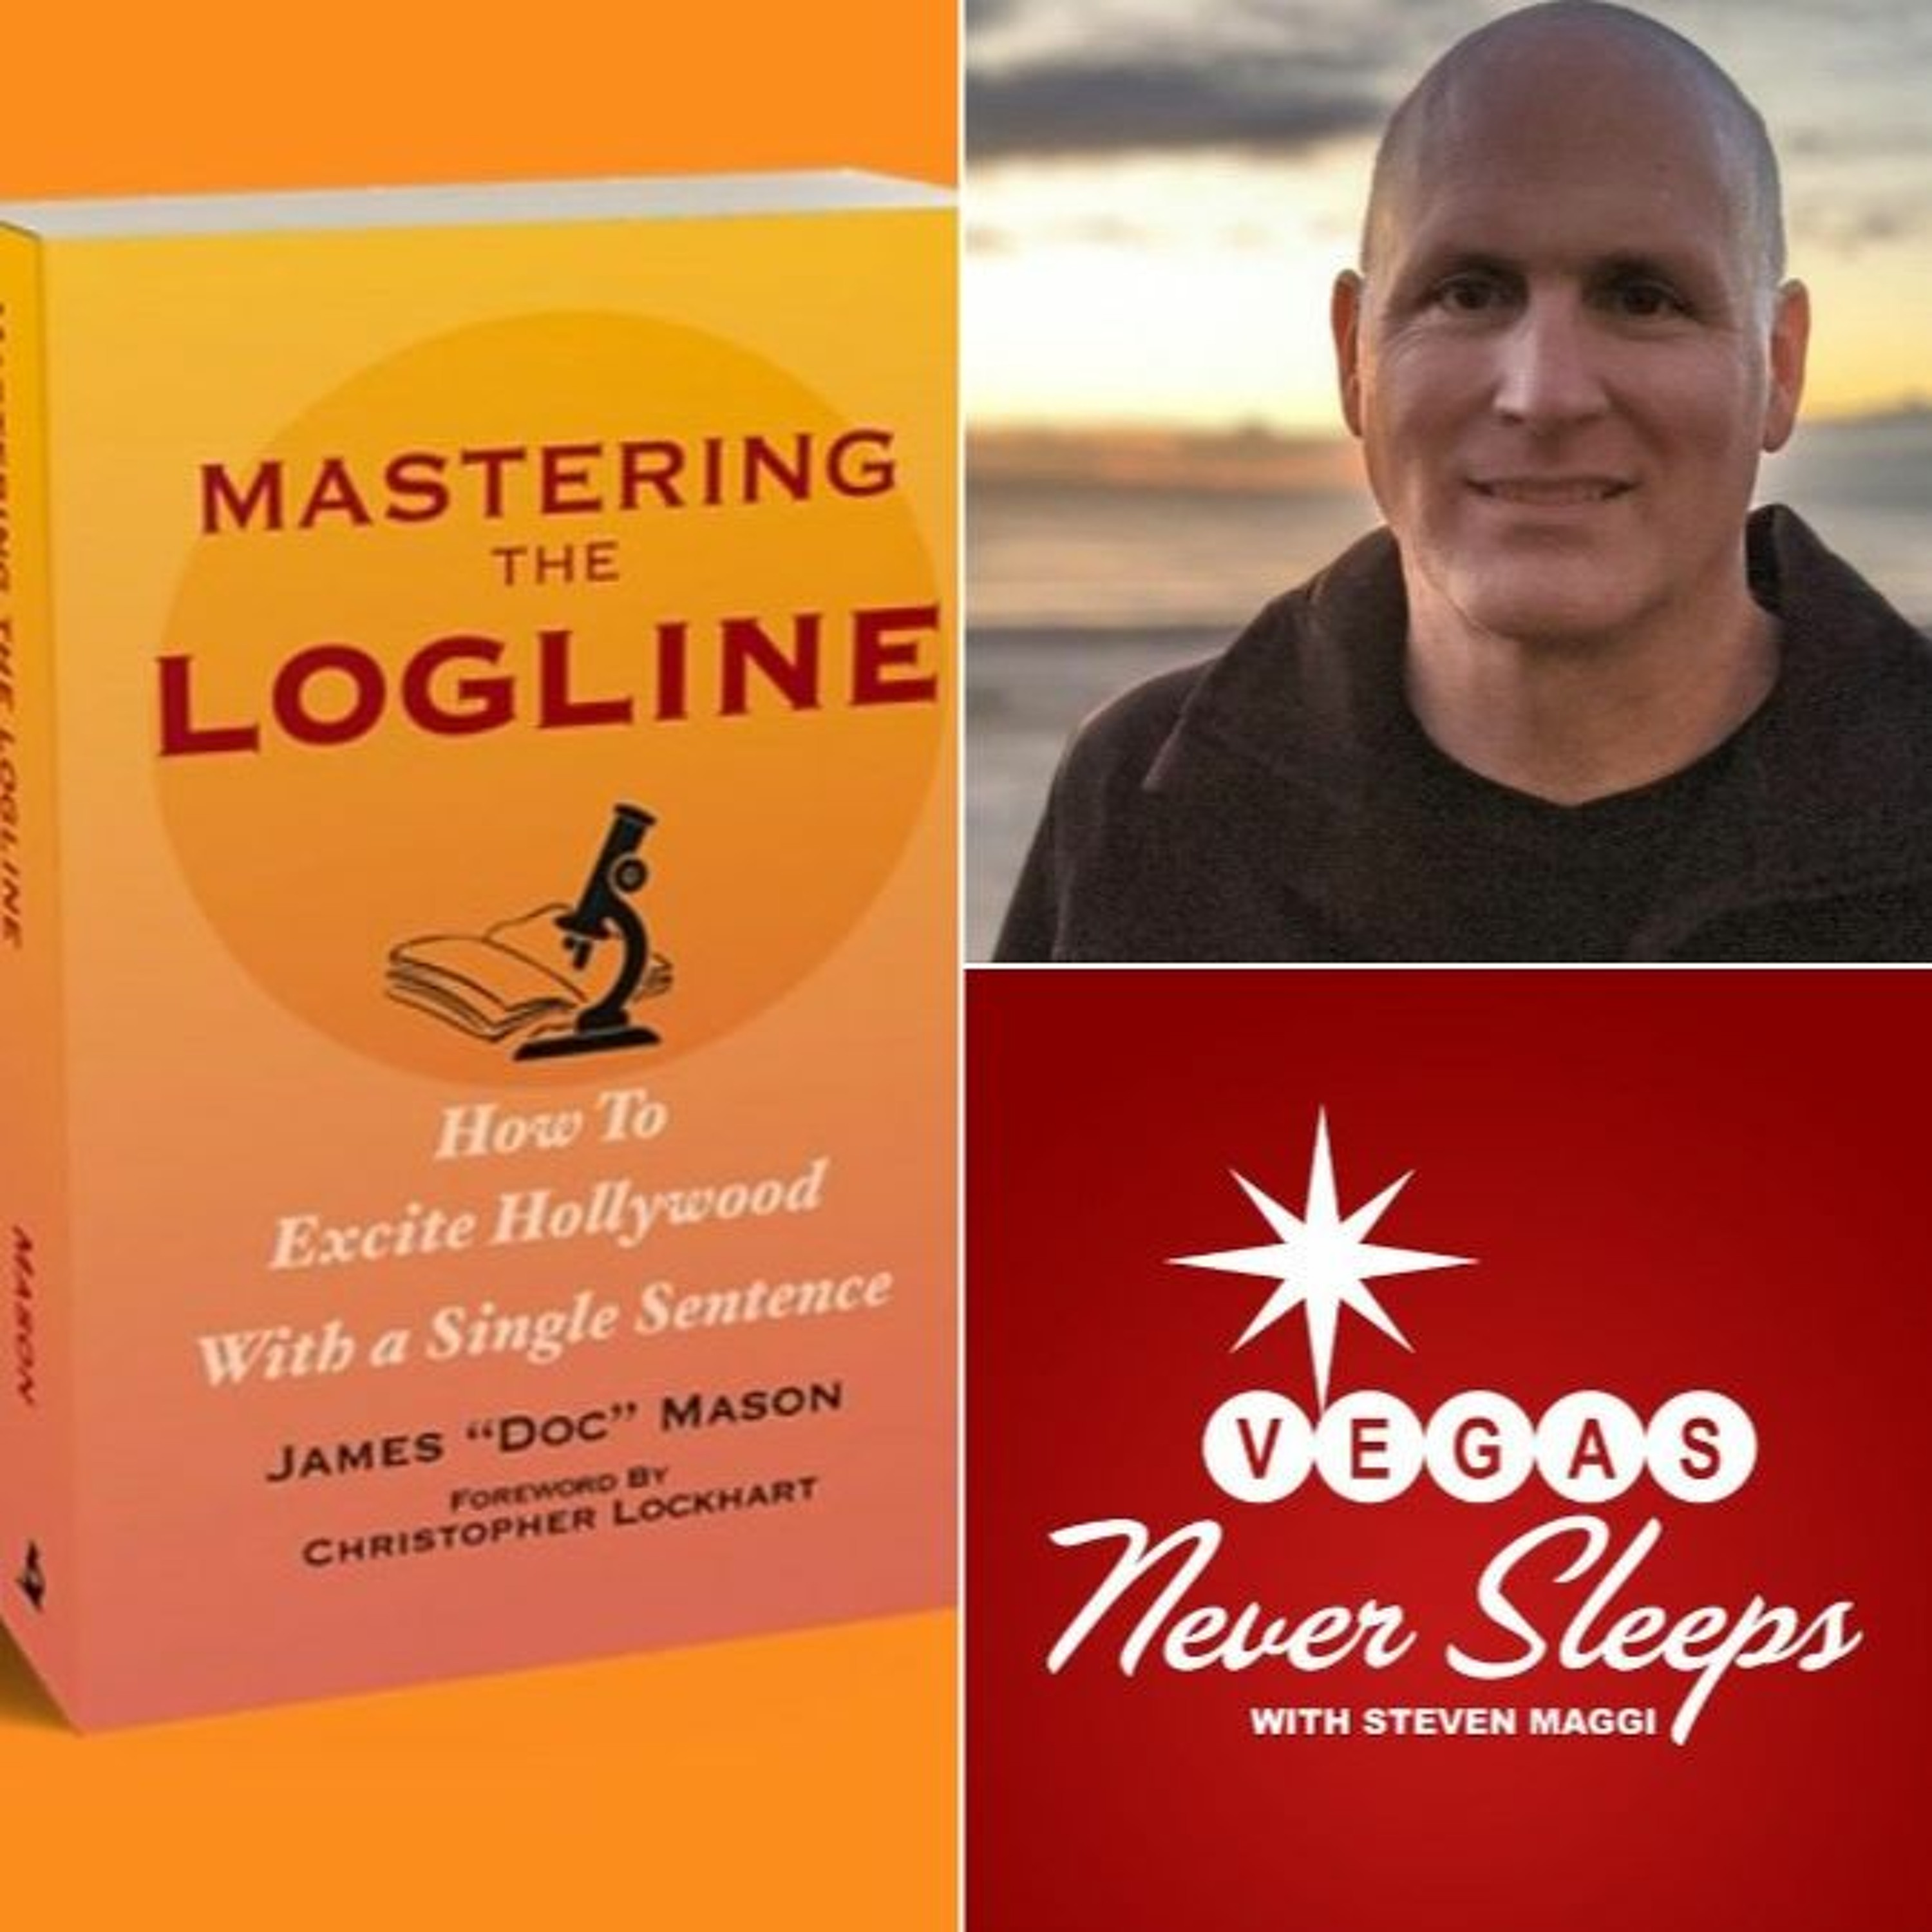 ”Mastering the Logline” - The Complete James ”Doc” Mason Interview